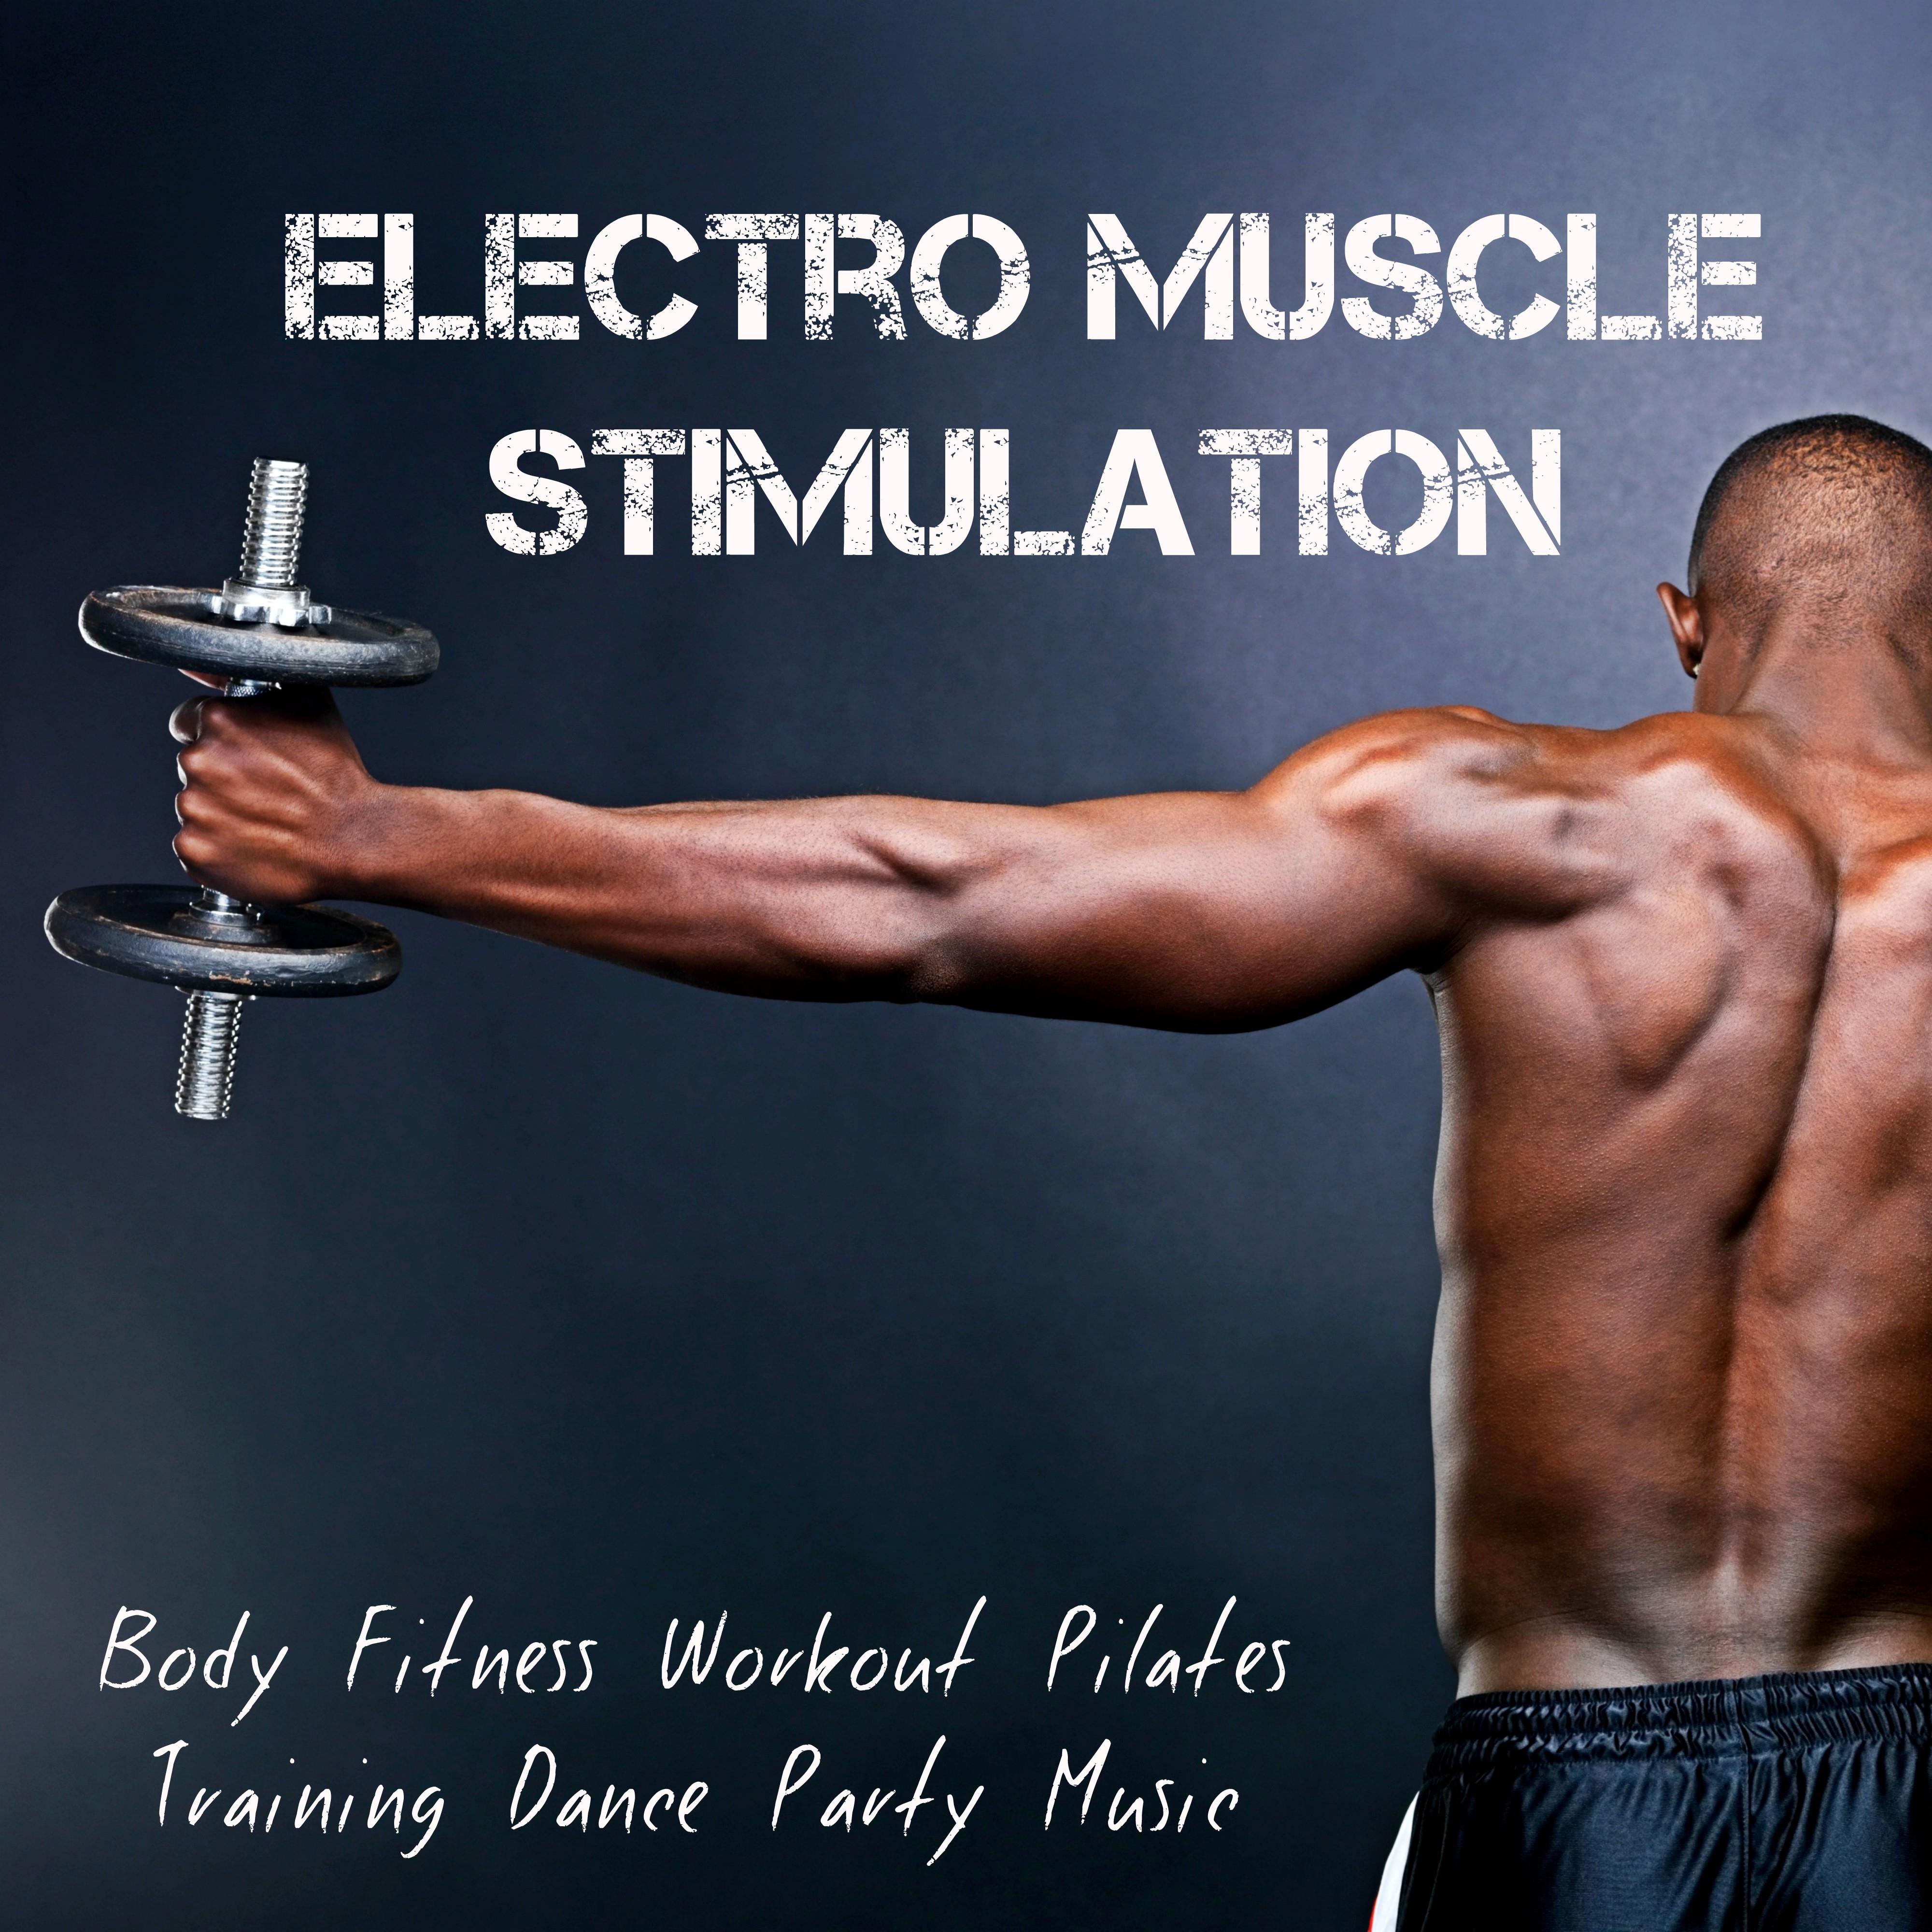 Electro Muscle Stimulation - Body Fitness Workout Pilates Training Dance Party Music with Deep House Electro Techno Dubstep Sounds